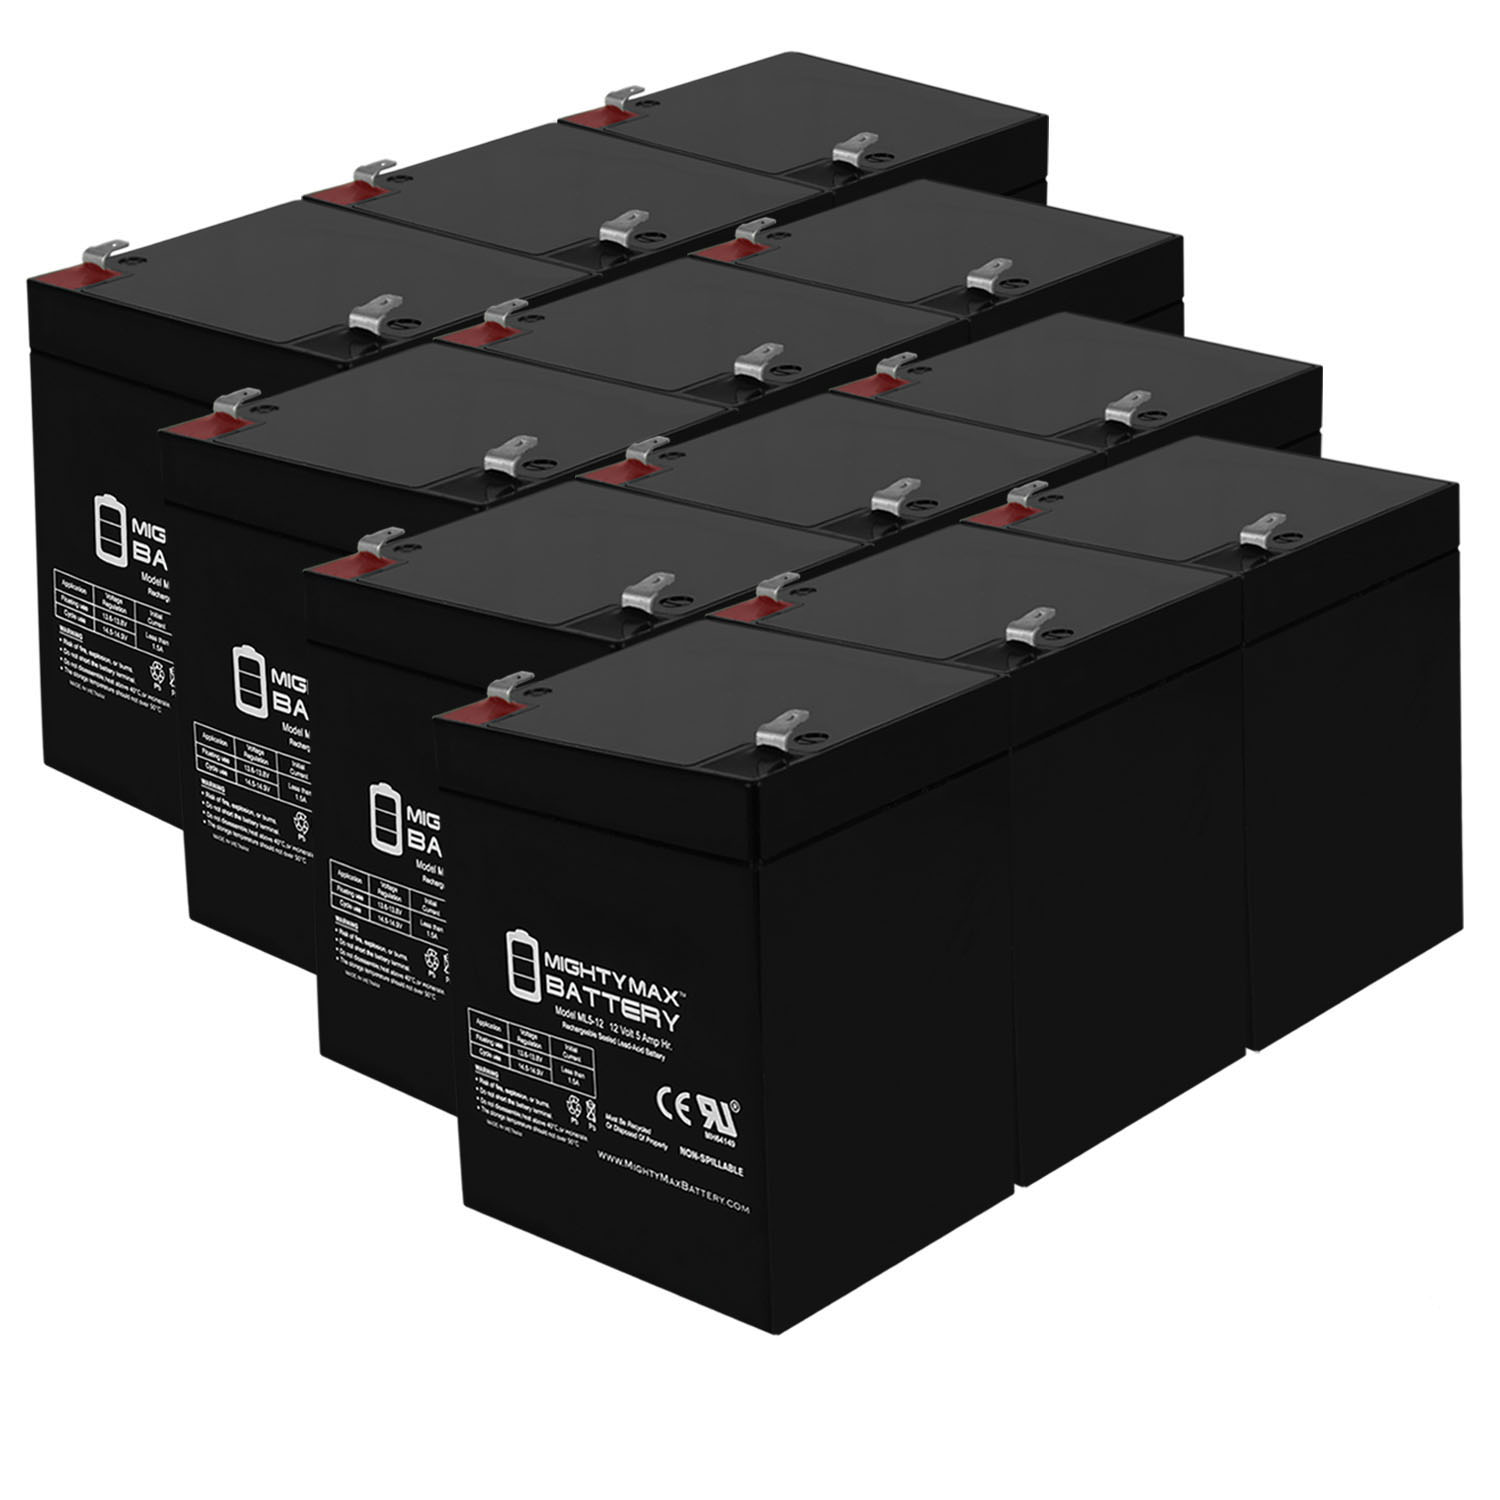 12V 5AH SLA Replacement Battery for PBQ 5 2-12 - 12 Pack